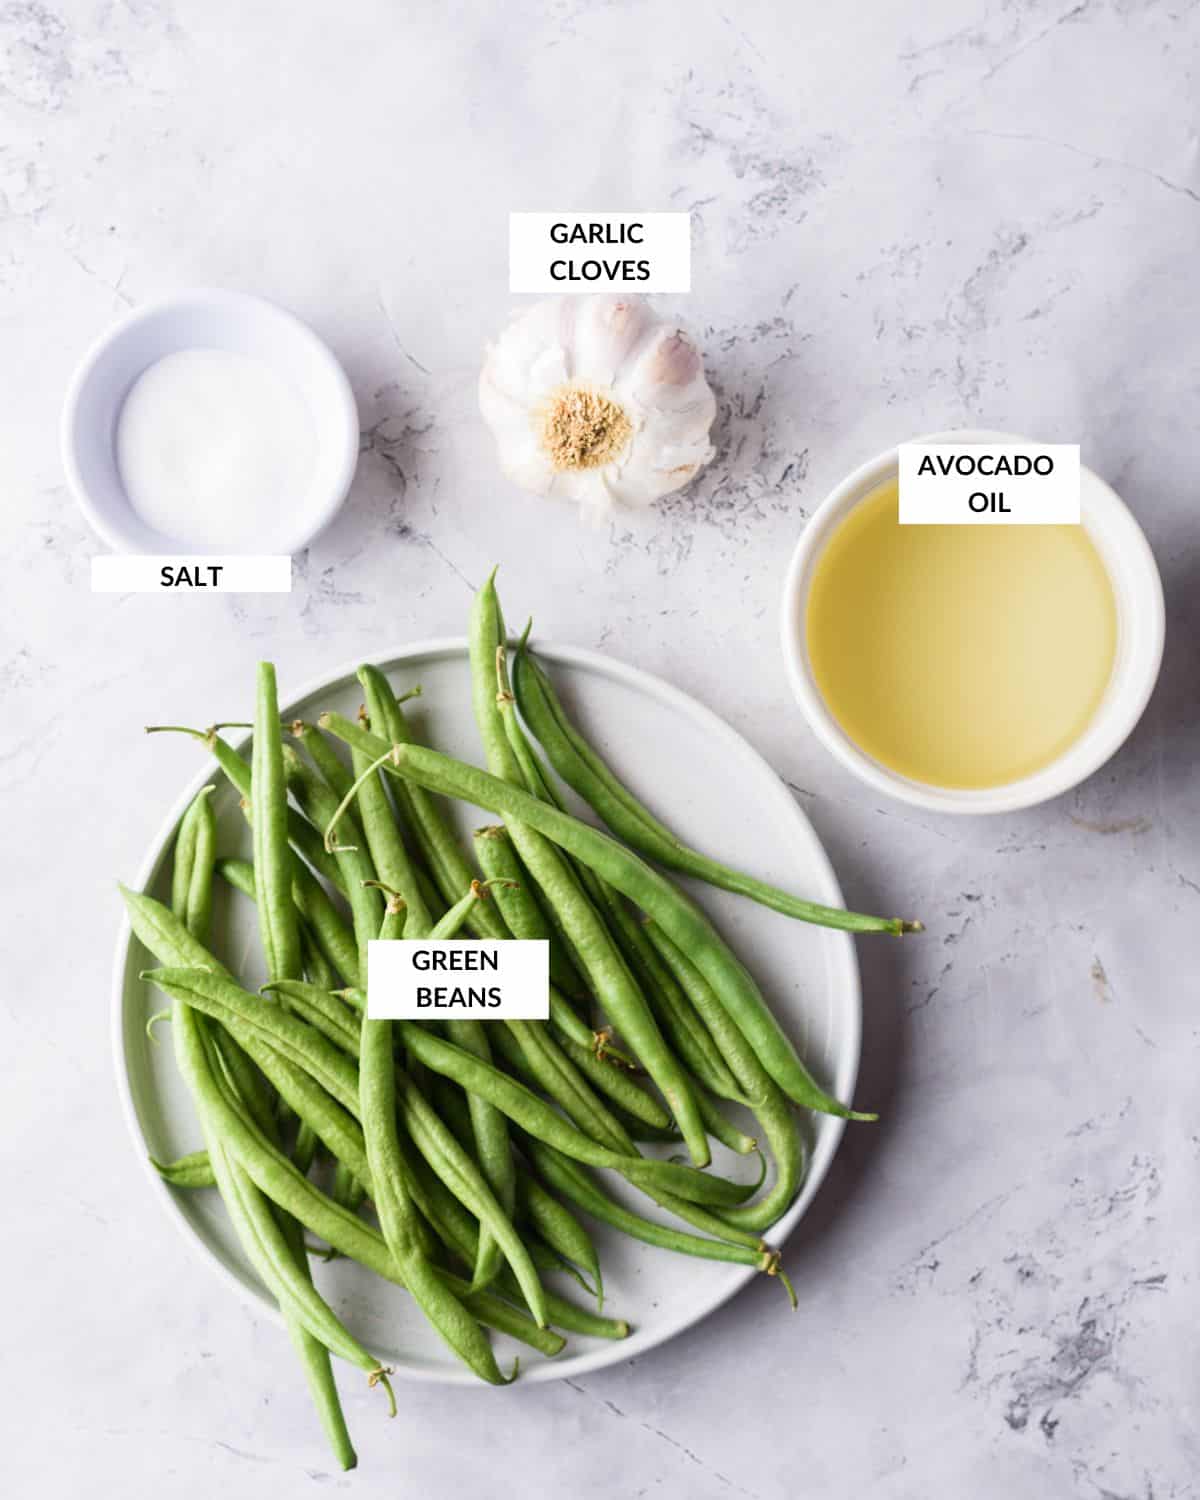 Labeled ingredient shot for green bean recipe - check recipe card for details.